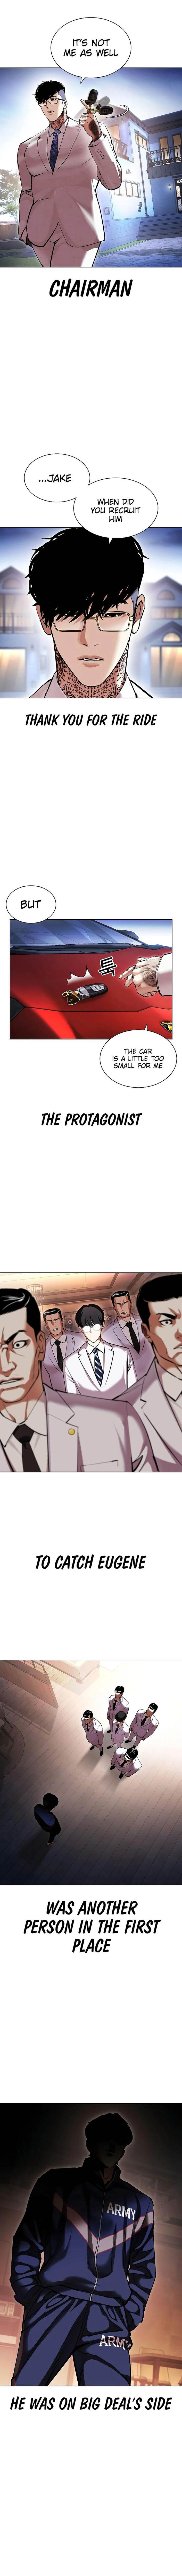 Lookism Chapter 416 image 19